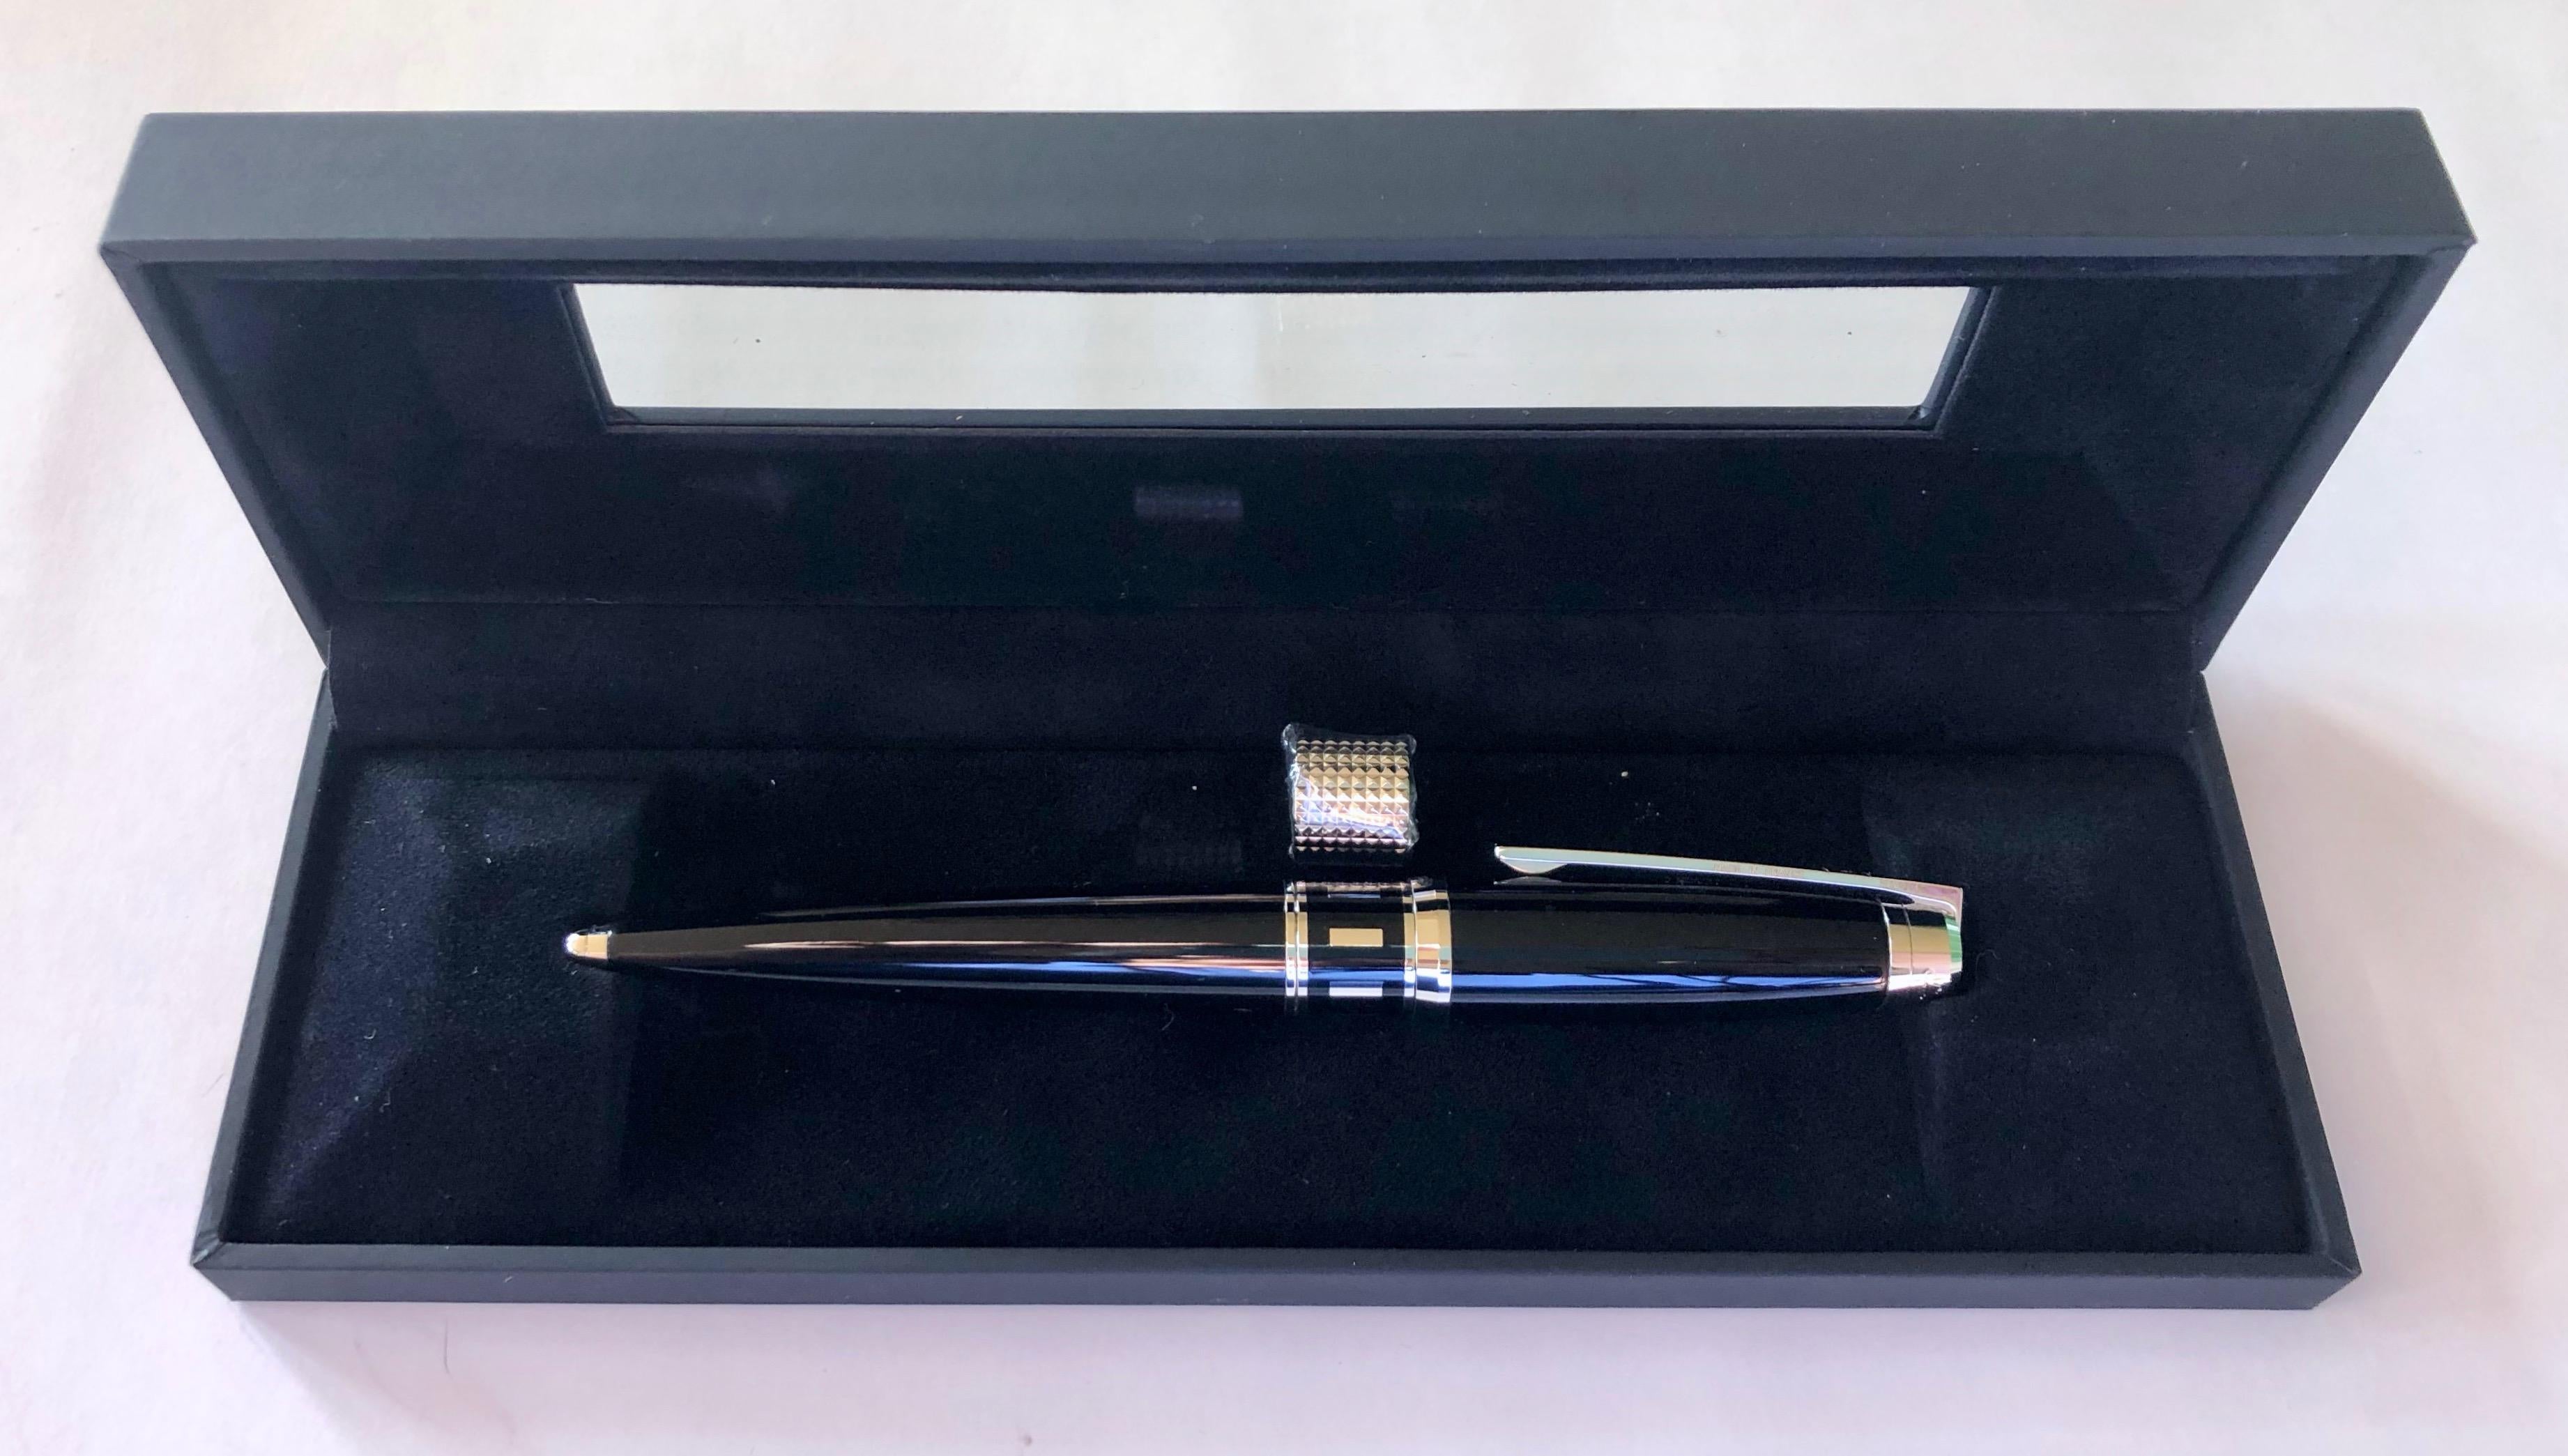 This French S. T. Dupont Paris Caprice Ballpoint Pen is in black lacquer and palladium with diamond head rings. It is brand new in it's original case with all papers and a worldwide 2 year warranty card.